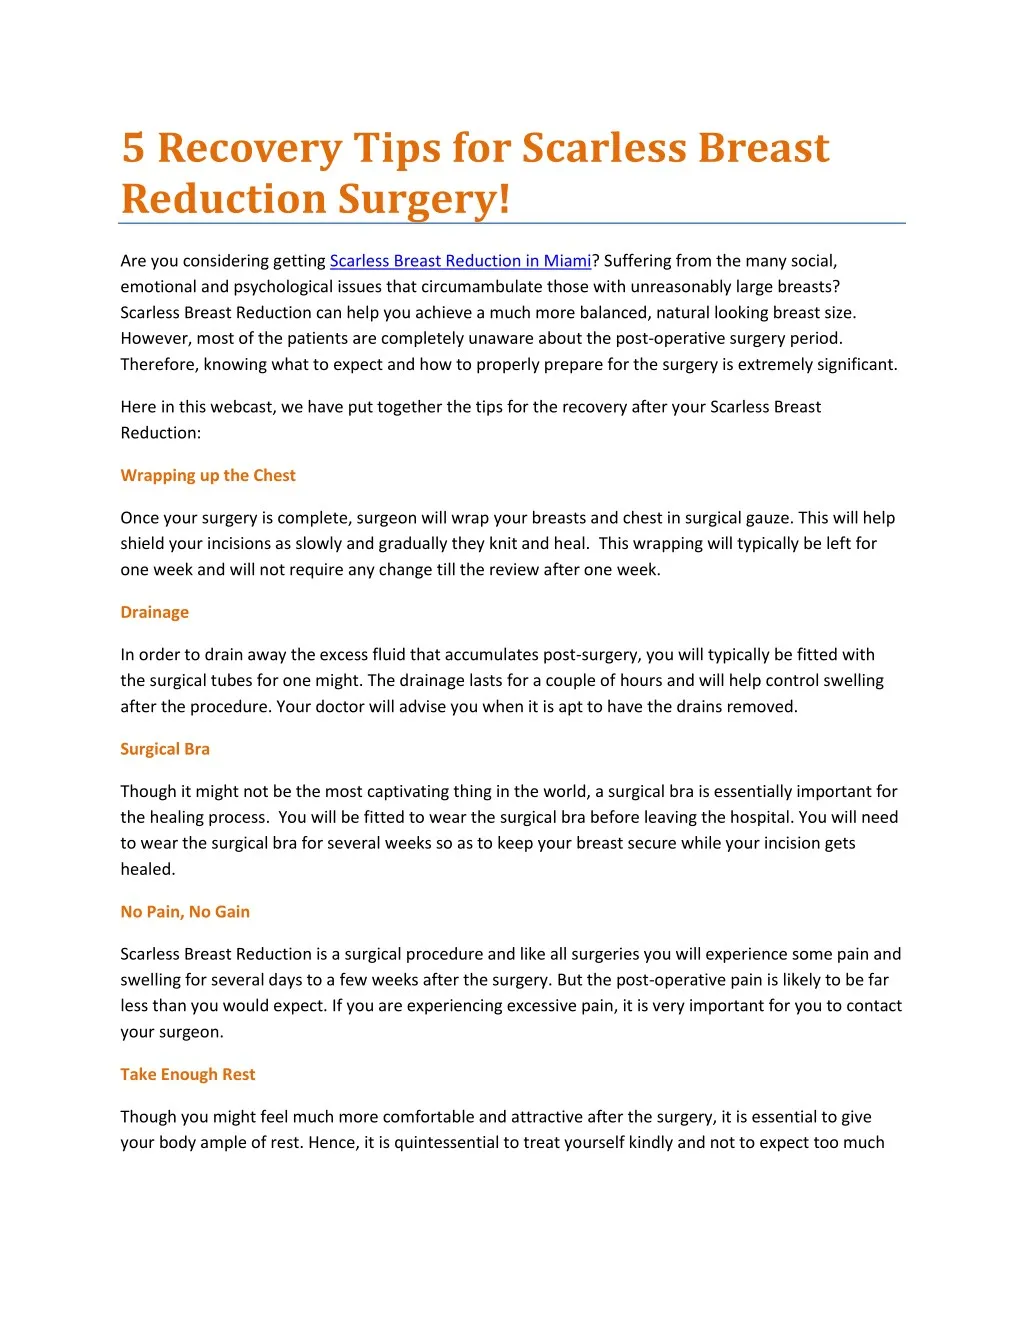 5 recovery tips for scarless breast reduction